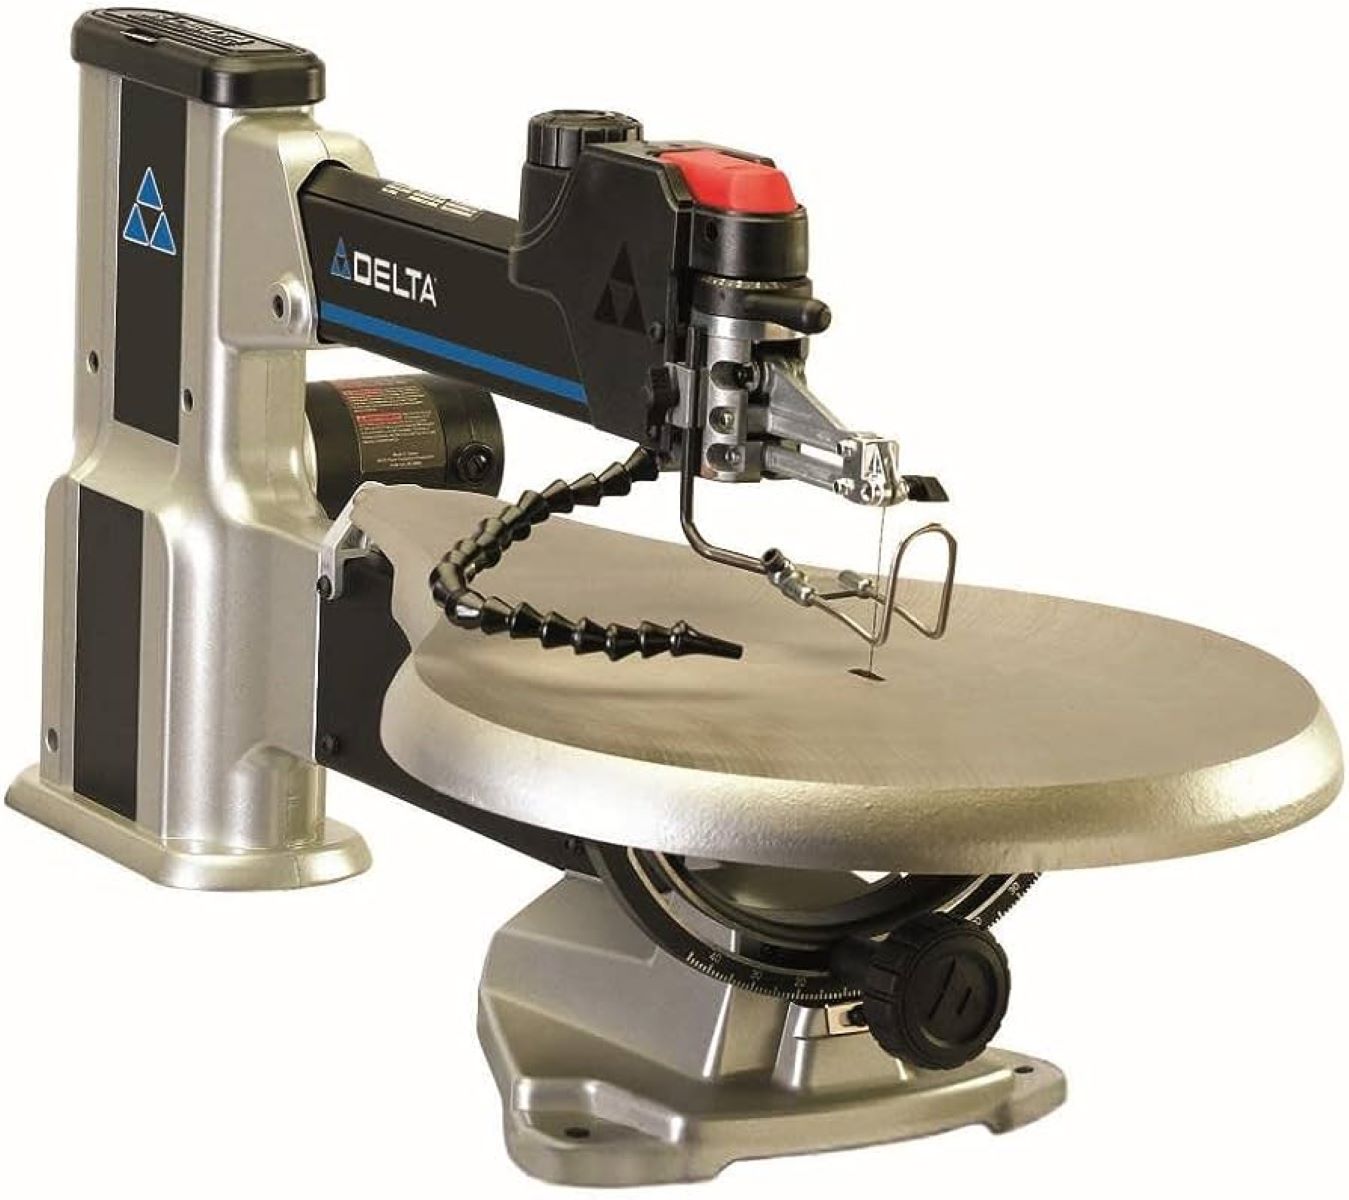 13 Amazing Delta Power Tools for 2023